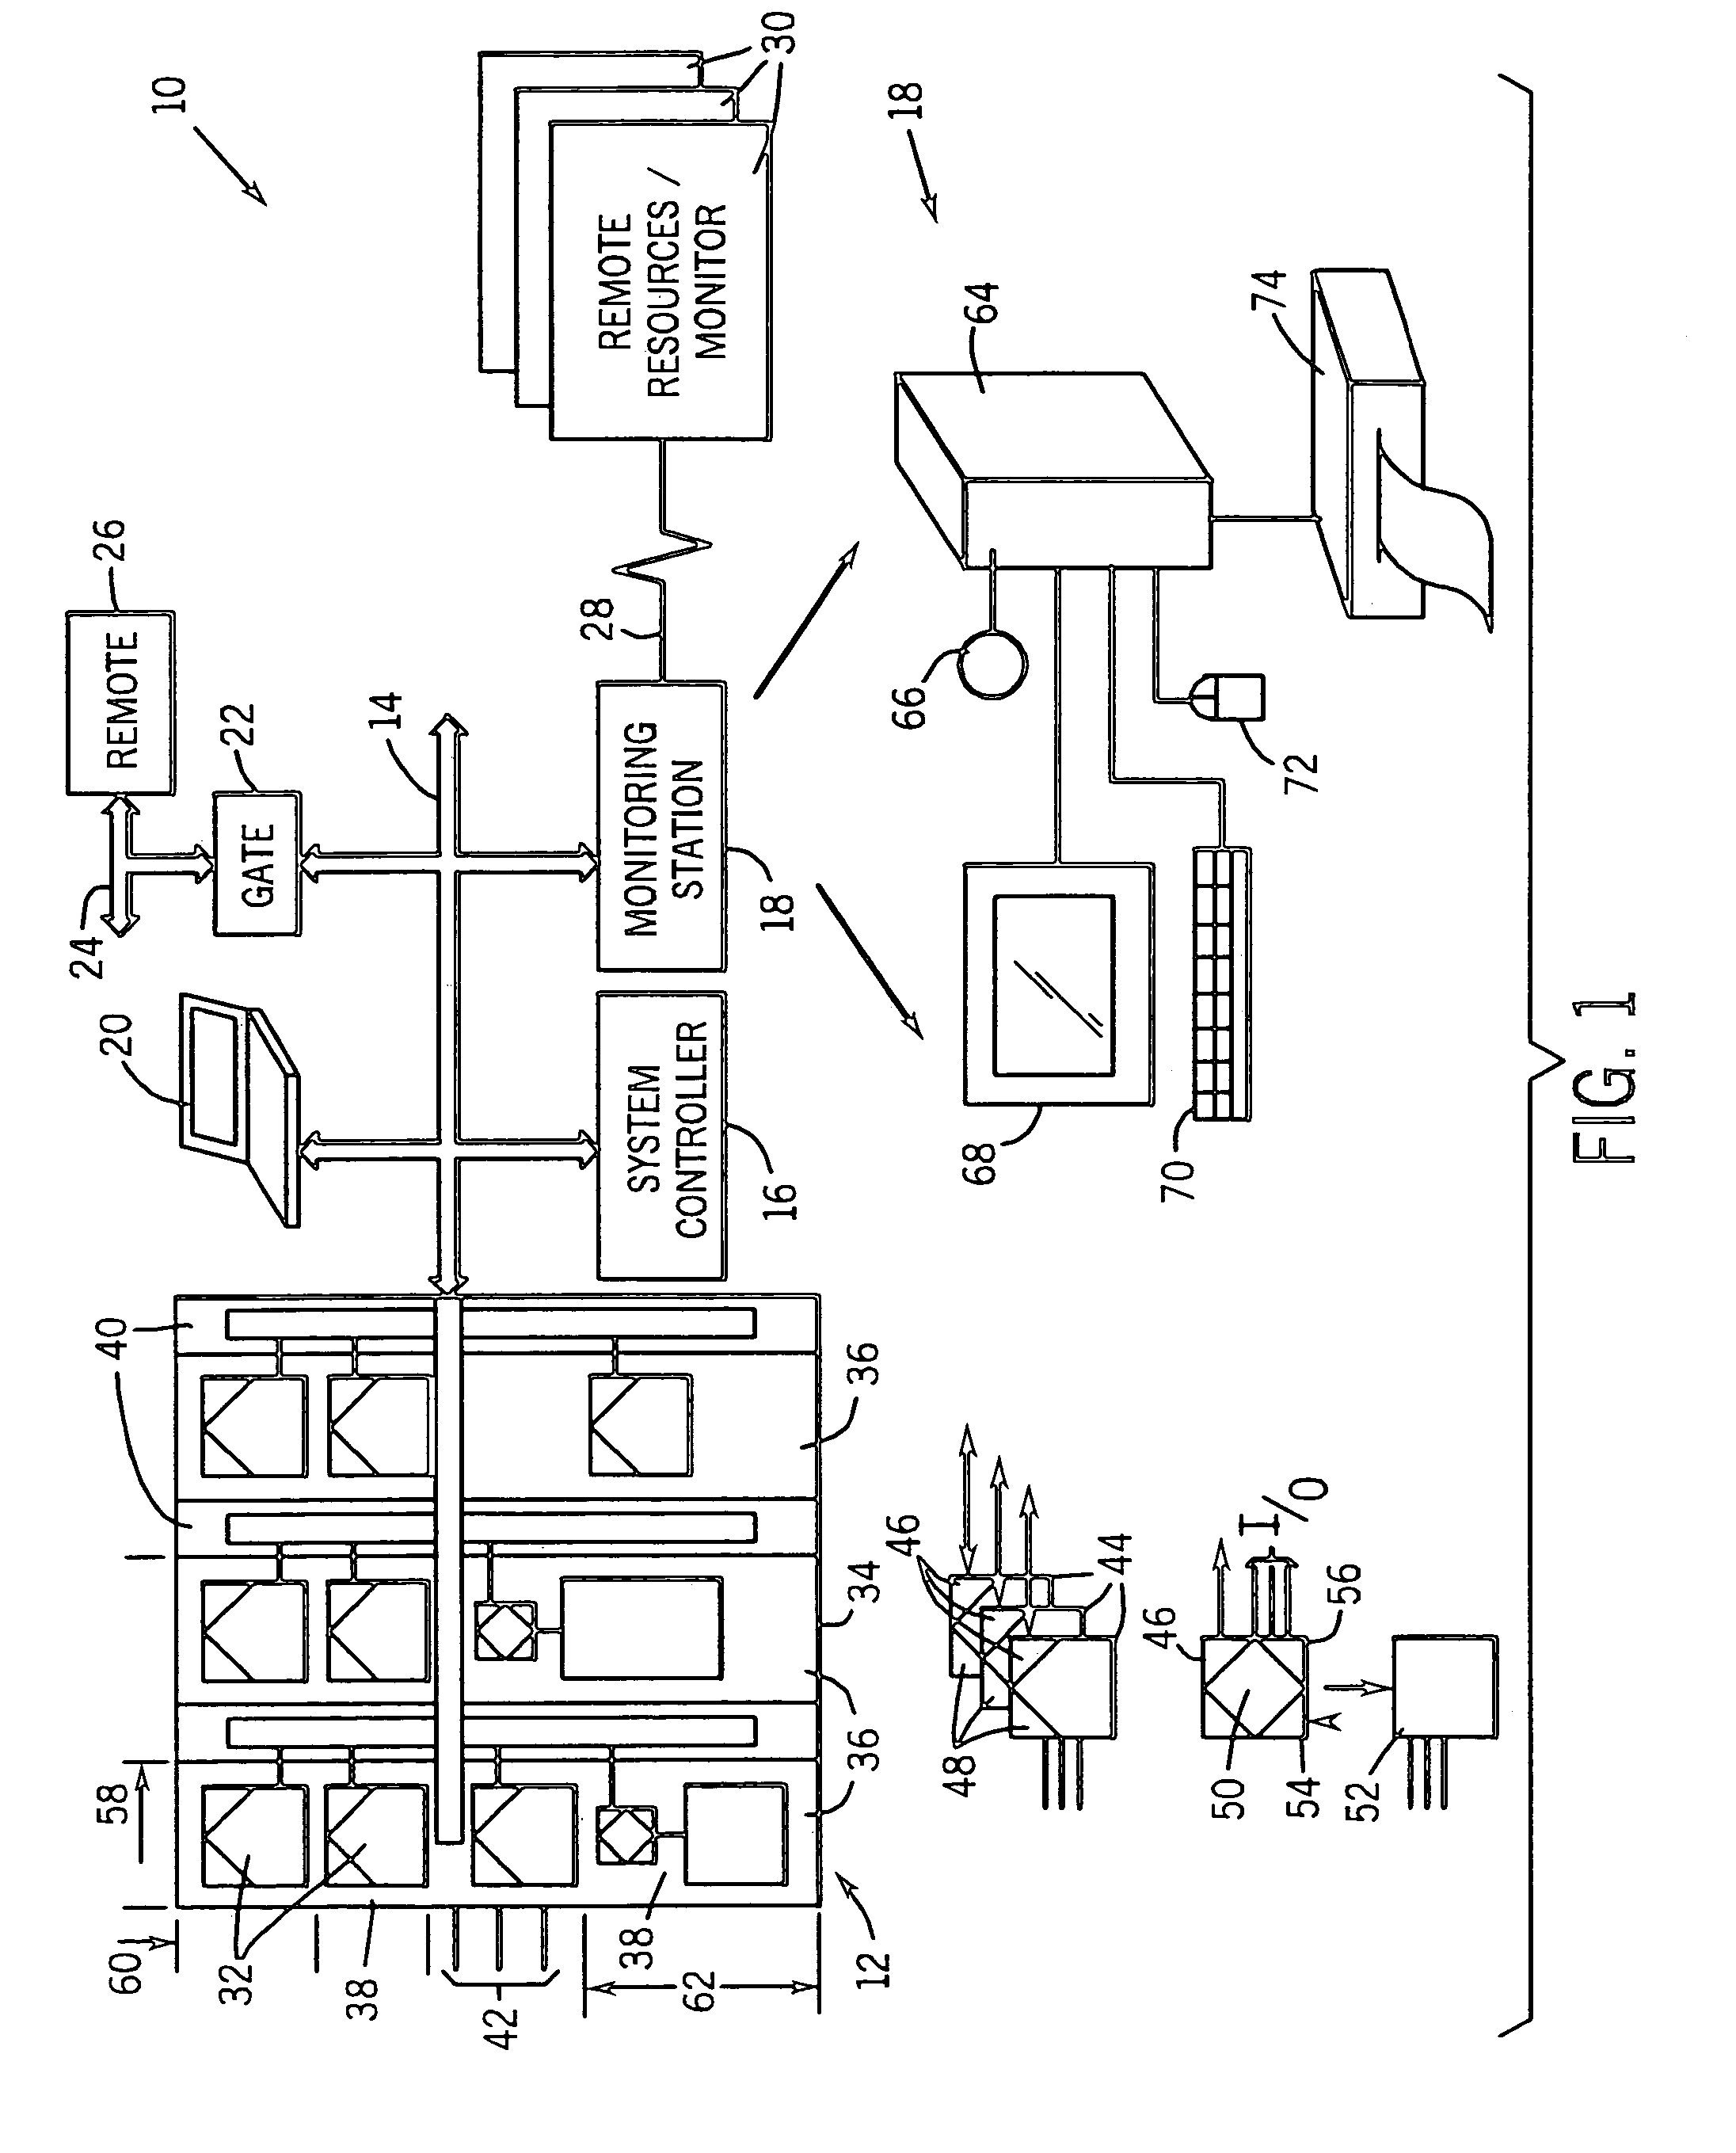 Networked control system with real time monitoring